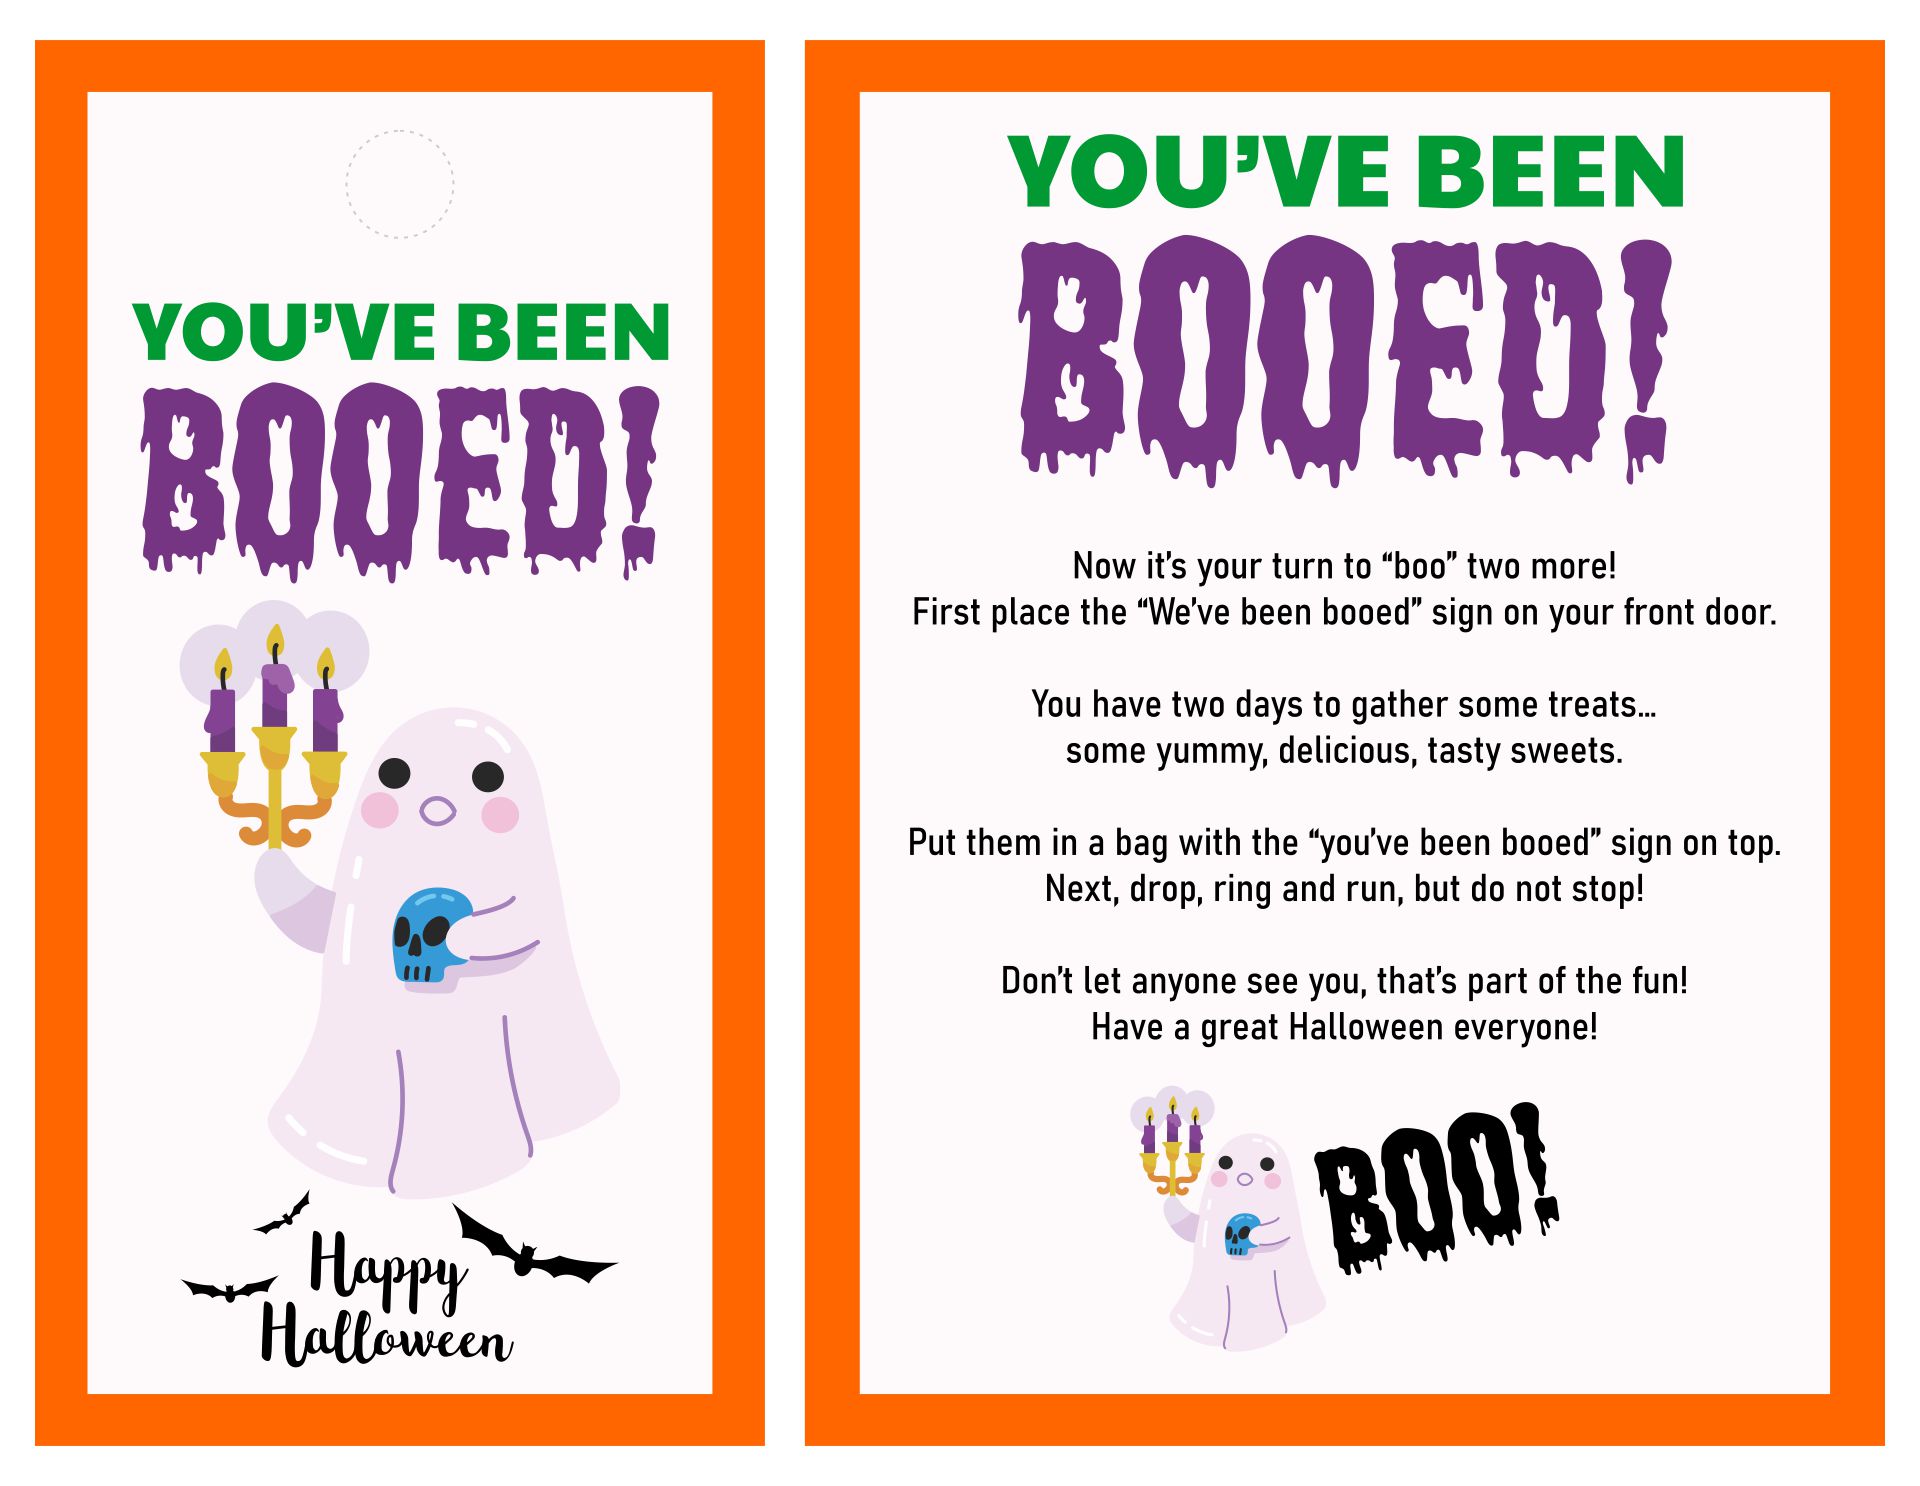 Booing Signs And Poem For Halloween